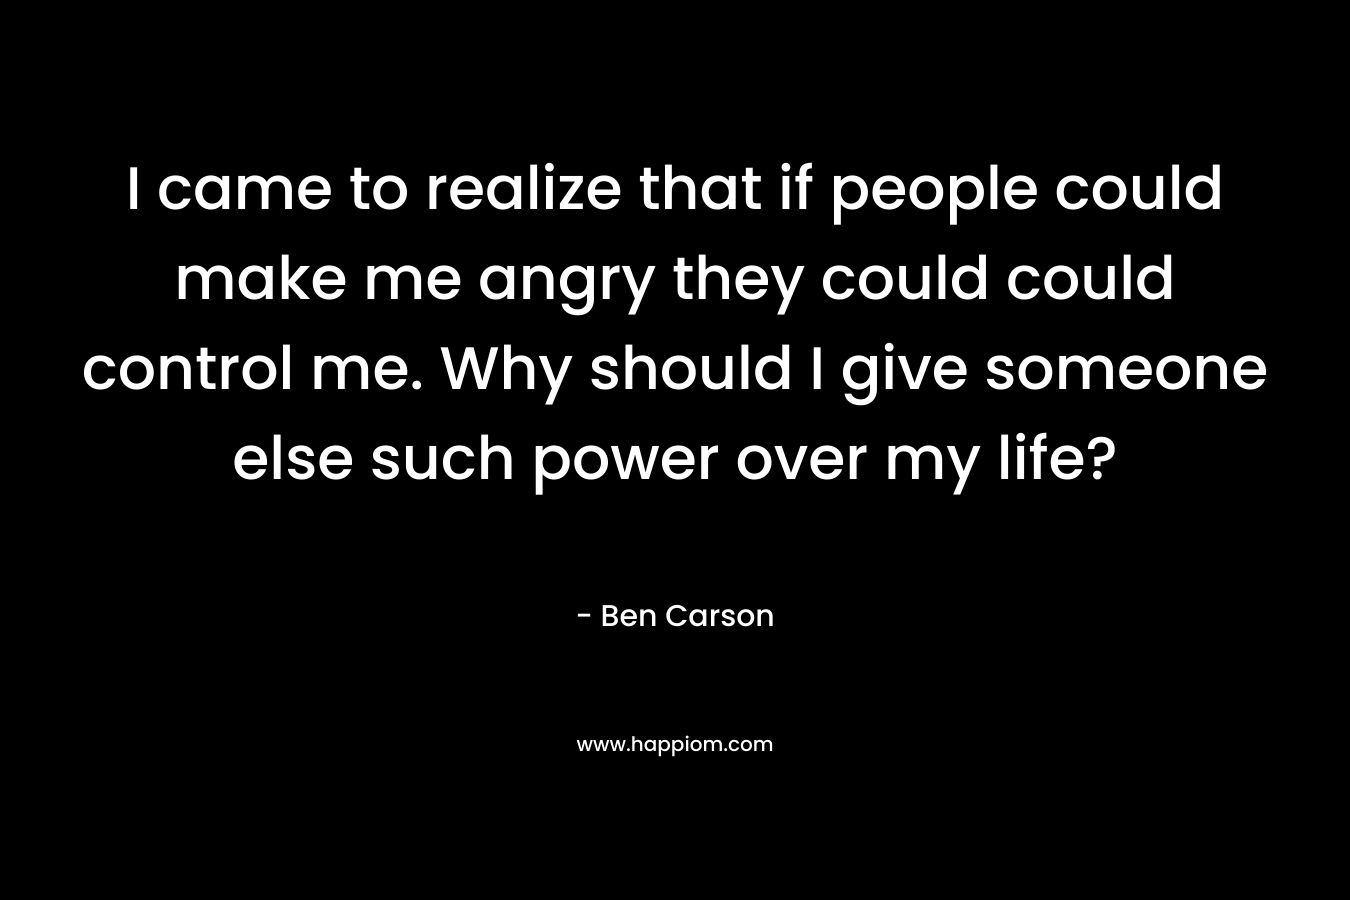 I came to realize that if people could make me angry they could could control me. Why should I give someone else such power over my life? – Ben Carson